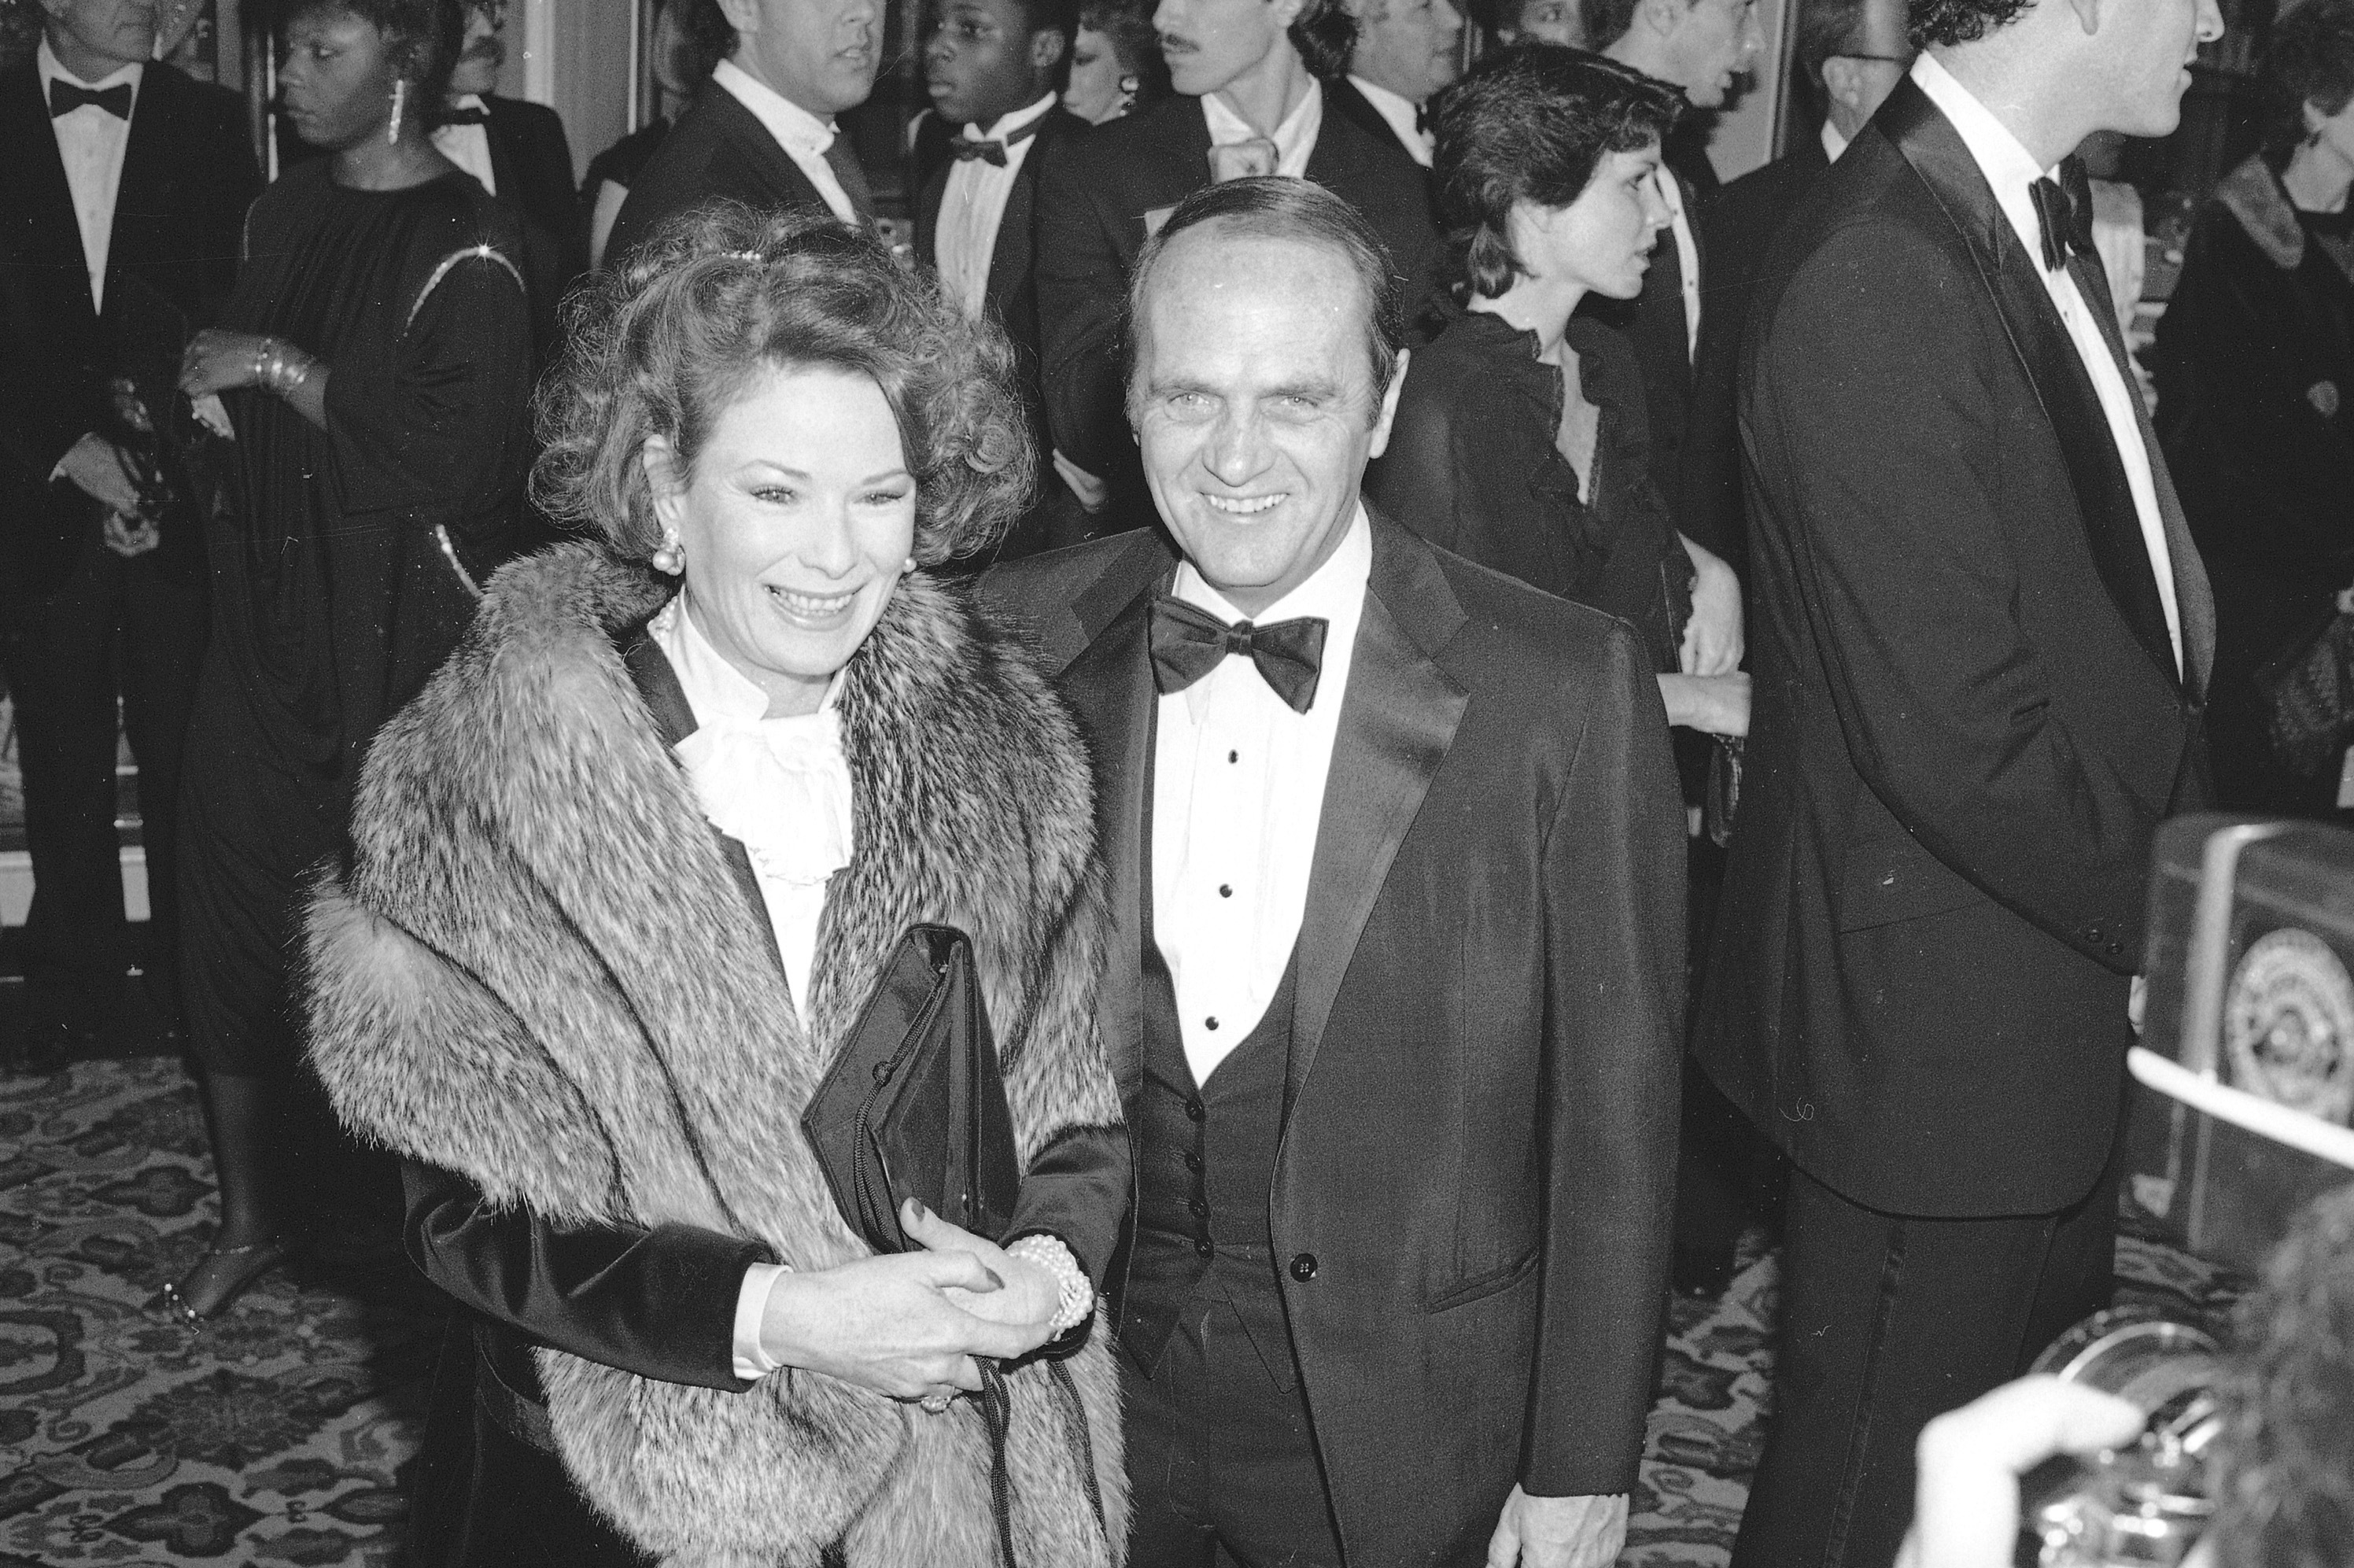 Comedian Bob Newhart and his wife Ginnie arrive at the Golden Globe Awards in Beverly Hills, California on January 26, 1985